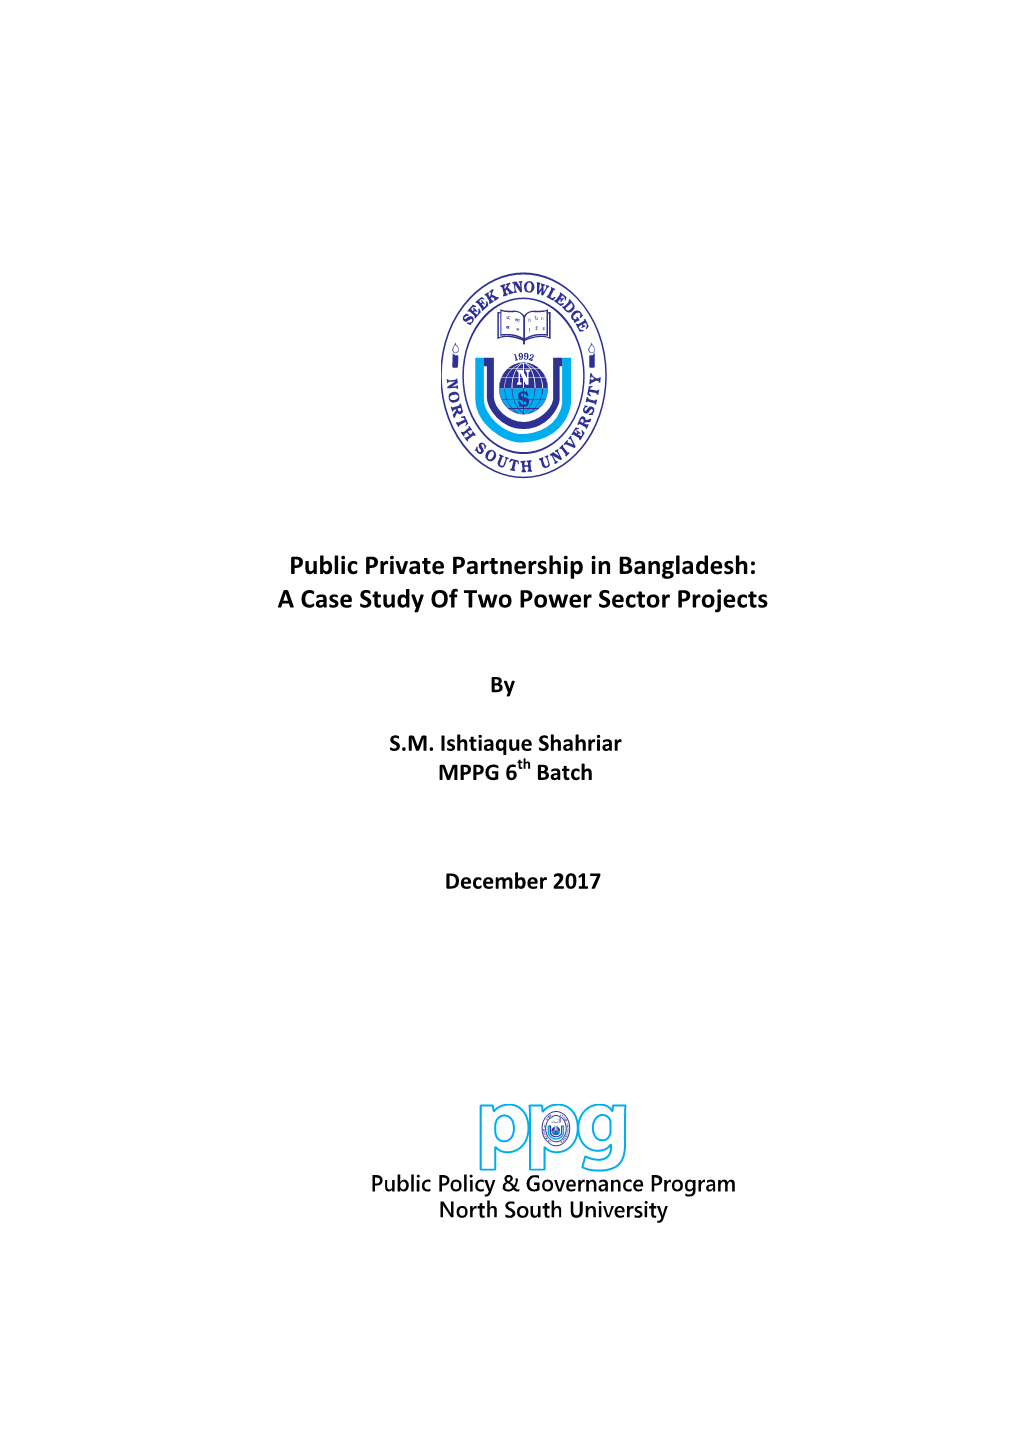 Public Private Partnership in Bangladesh: a Case Study of Two Power Sector Projects